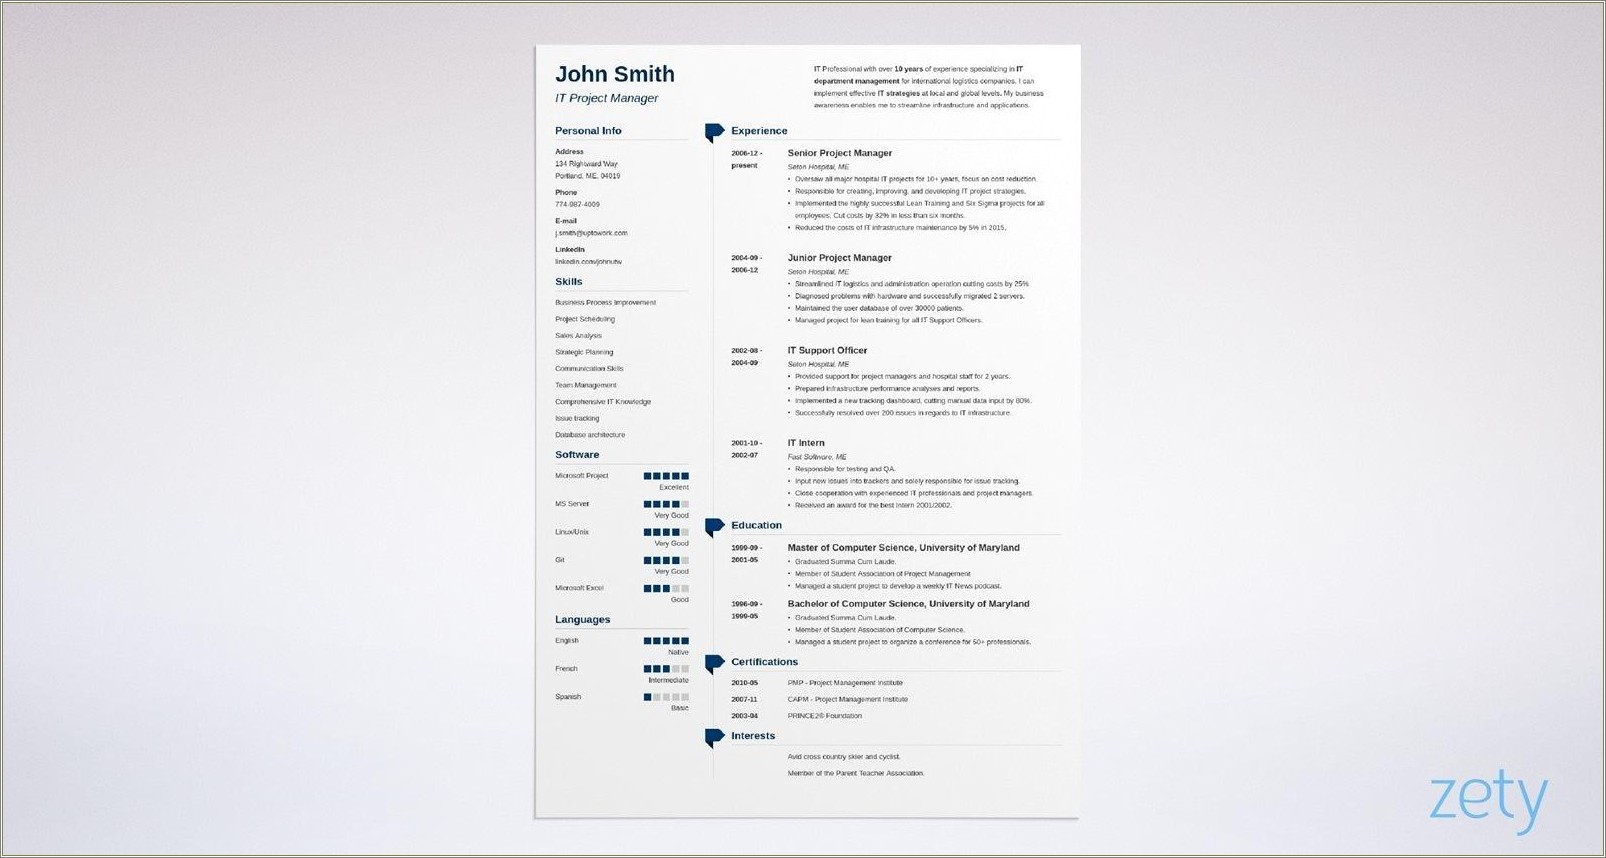 Free Fill Inthe Blank Resume Templates